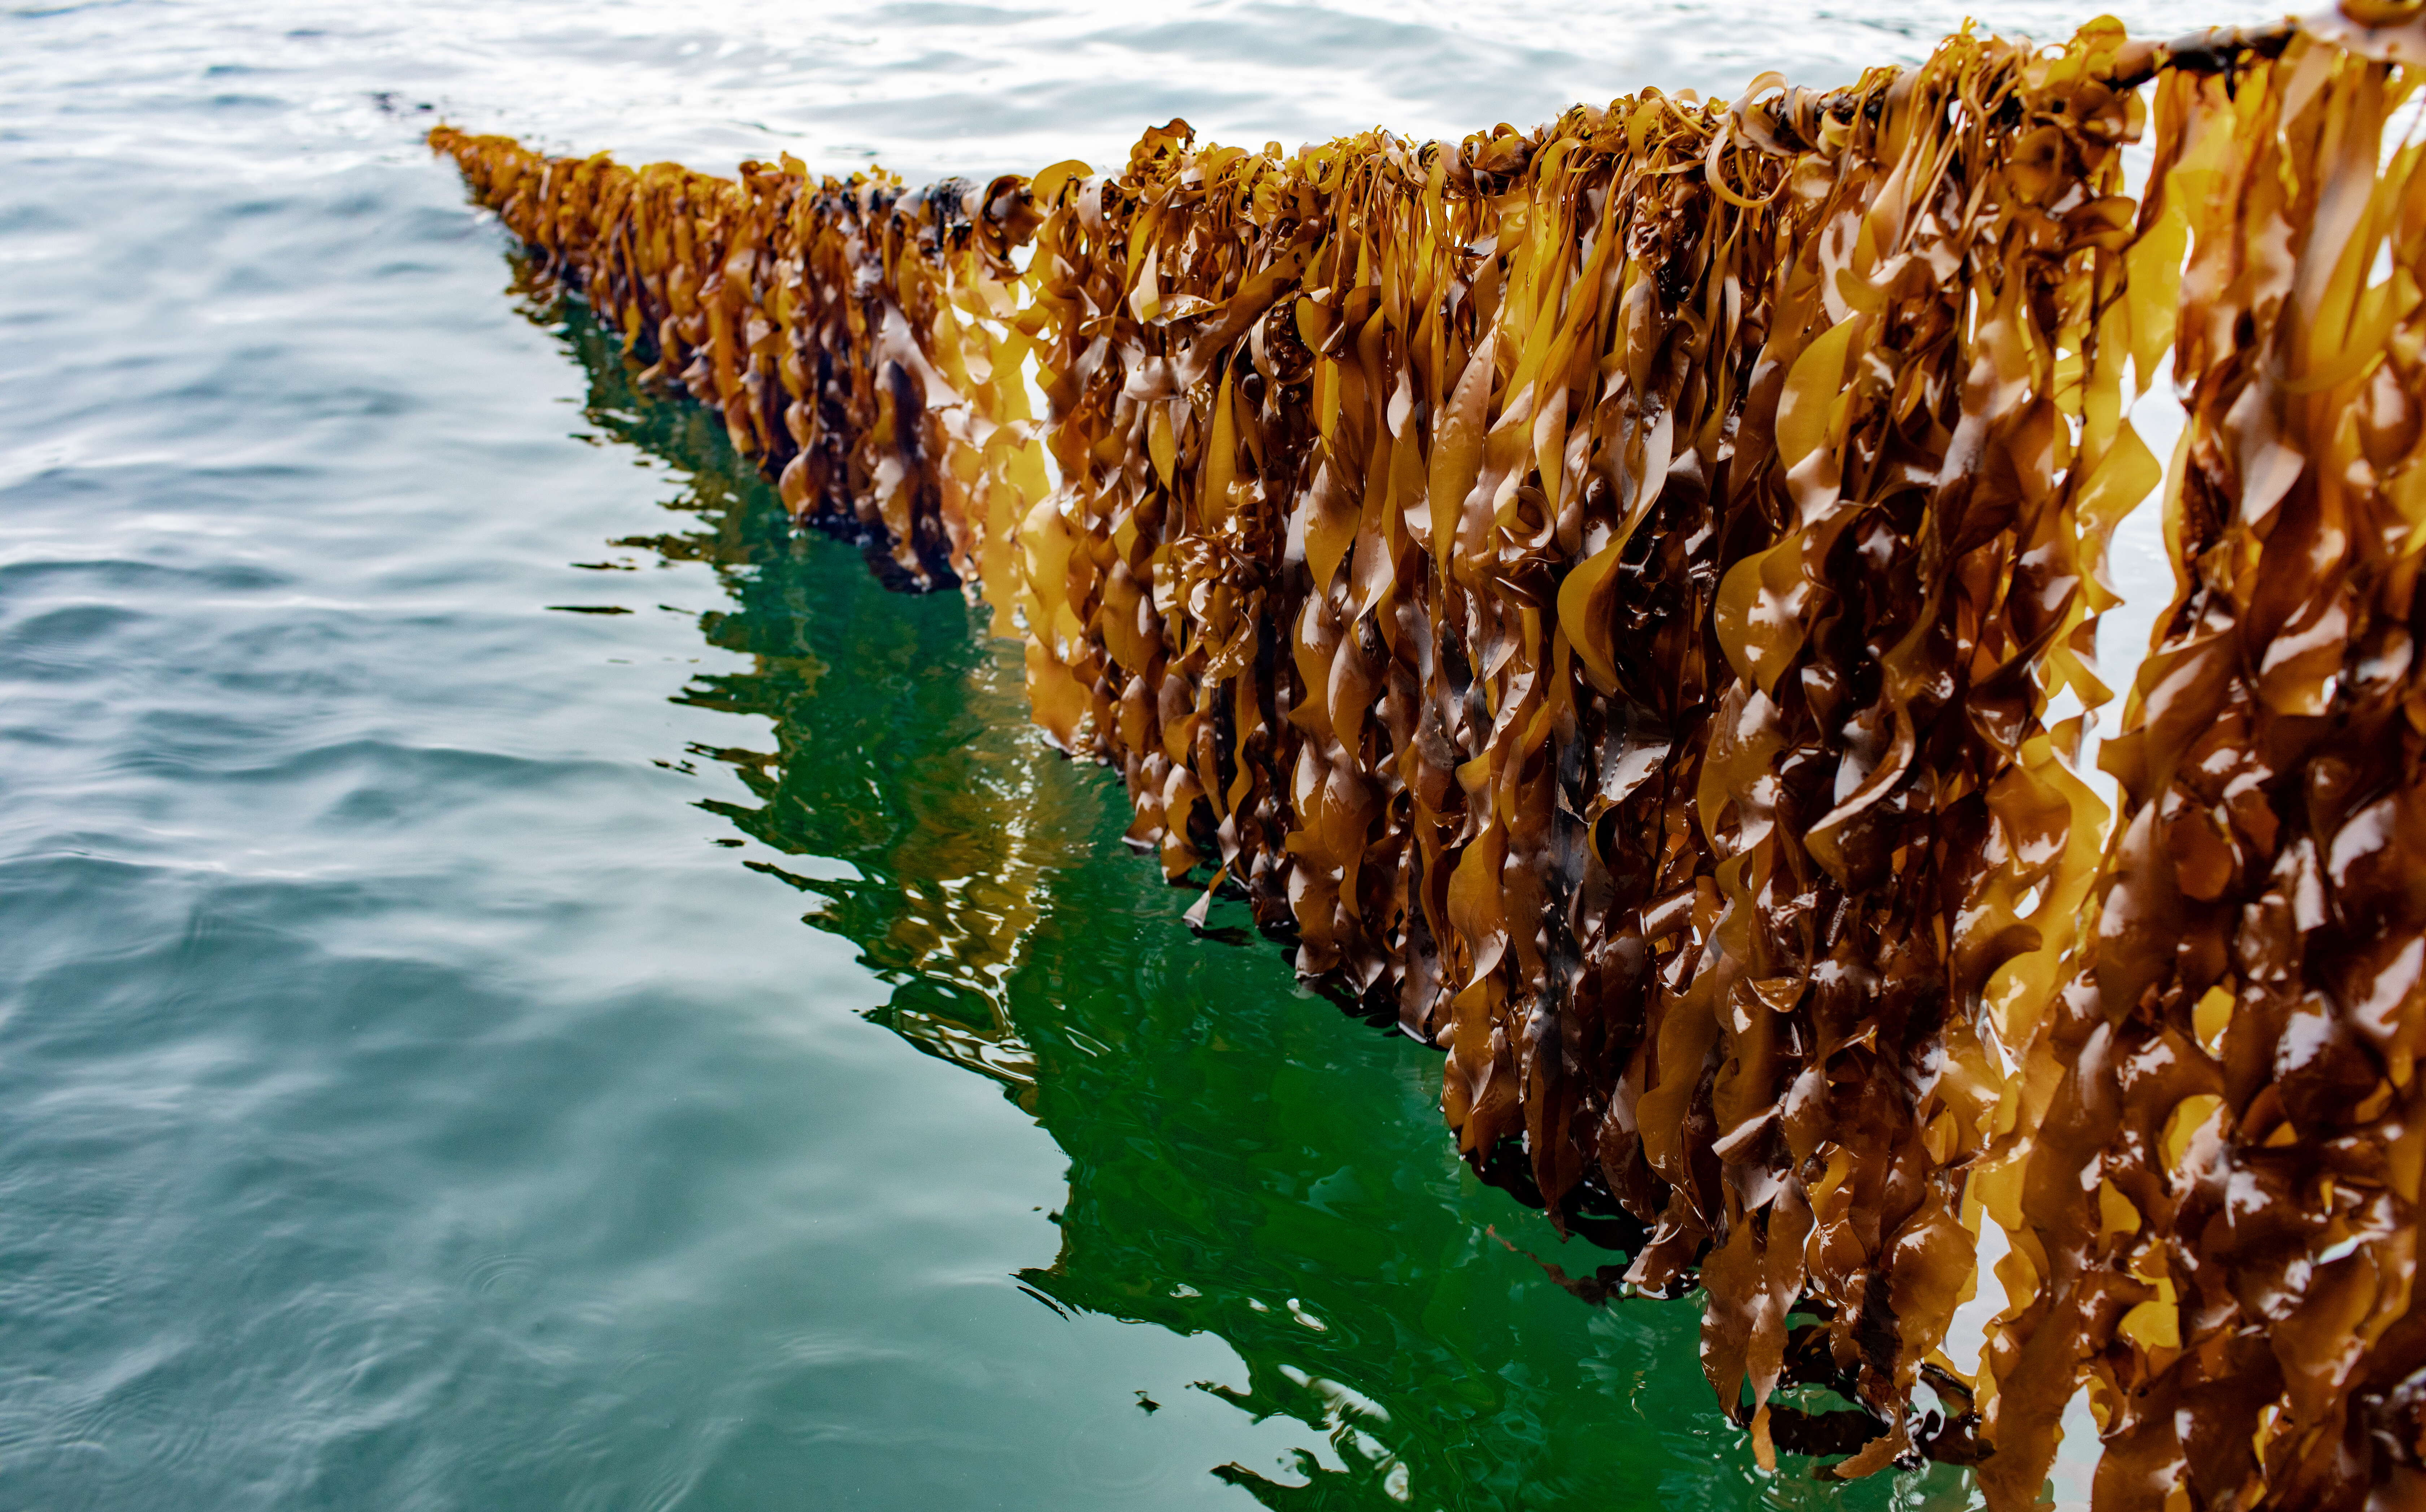 Seaweed hangs from a line over the water.